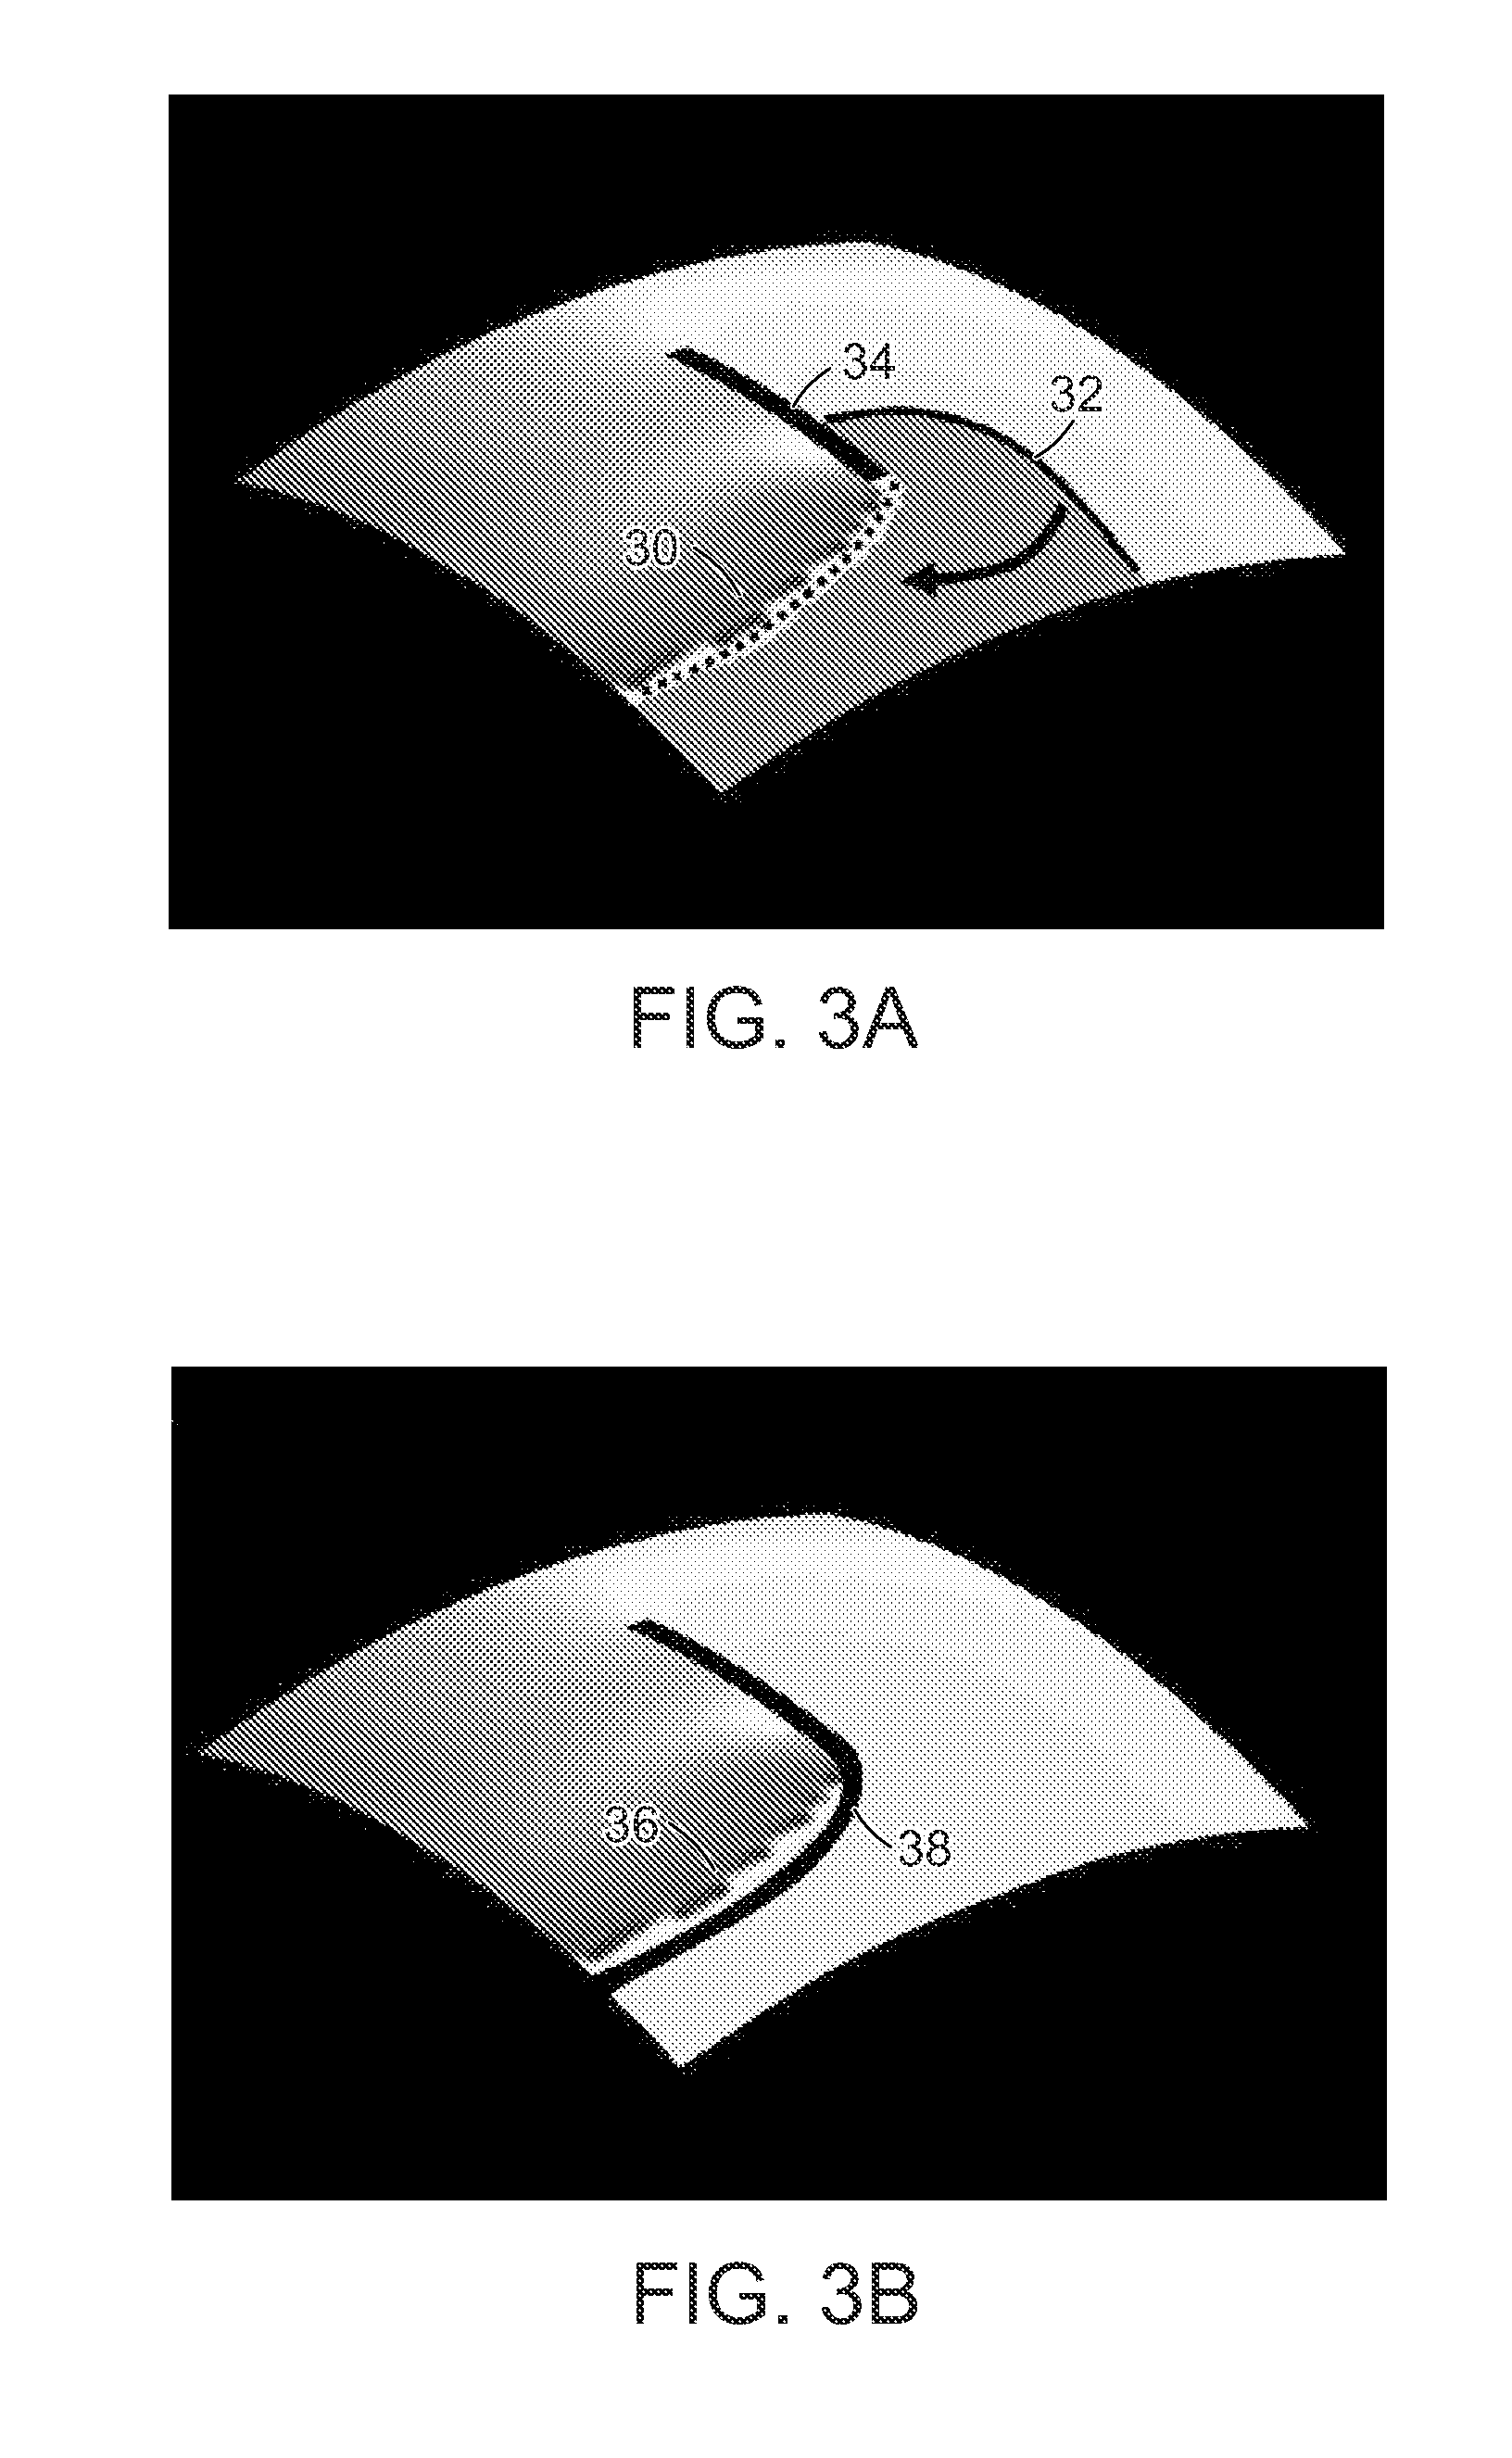 Catheter systems and related methods for mapping, minimizing, and treating cardiac fibrillation